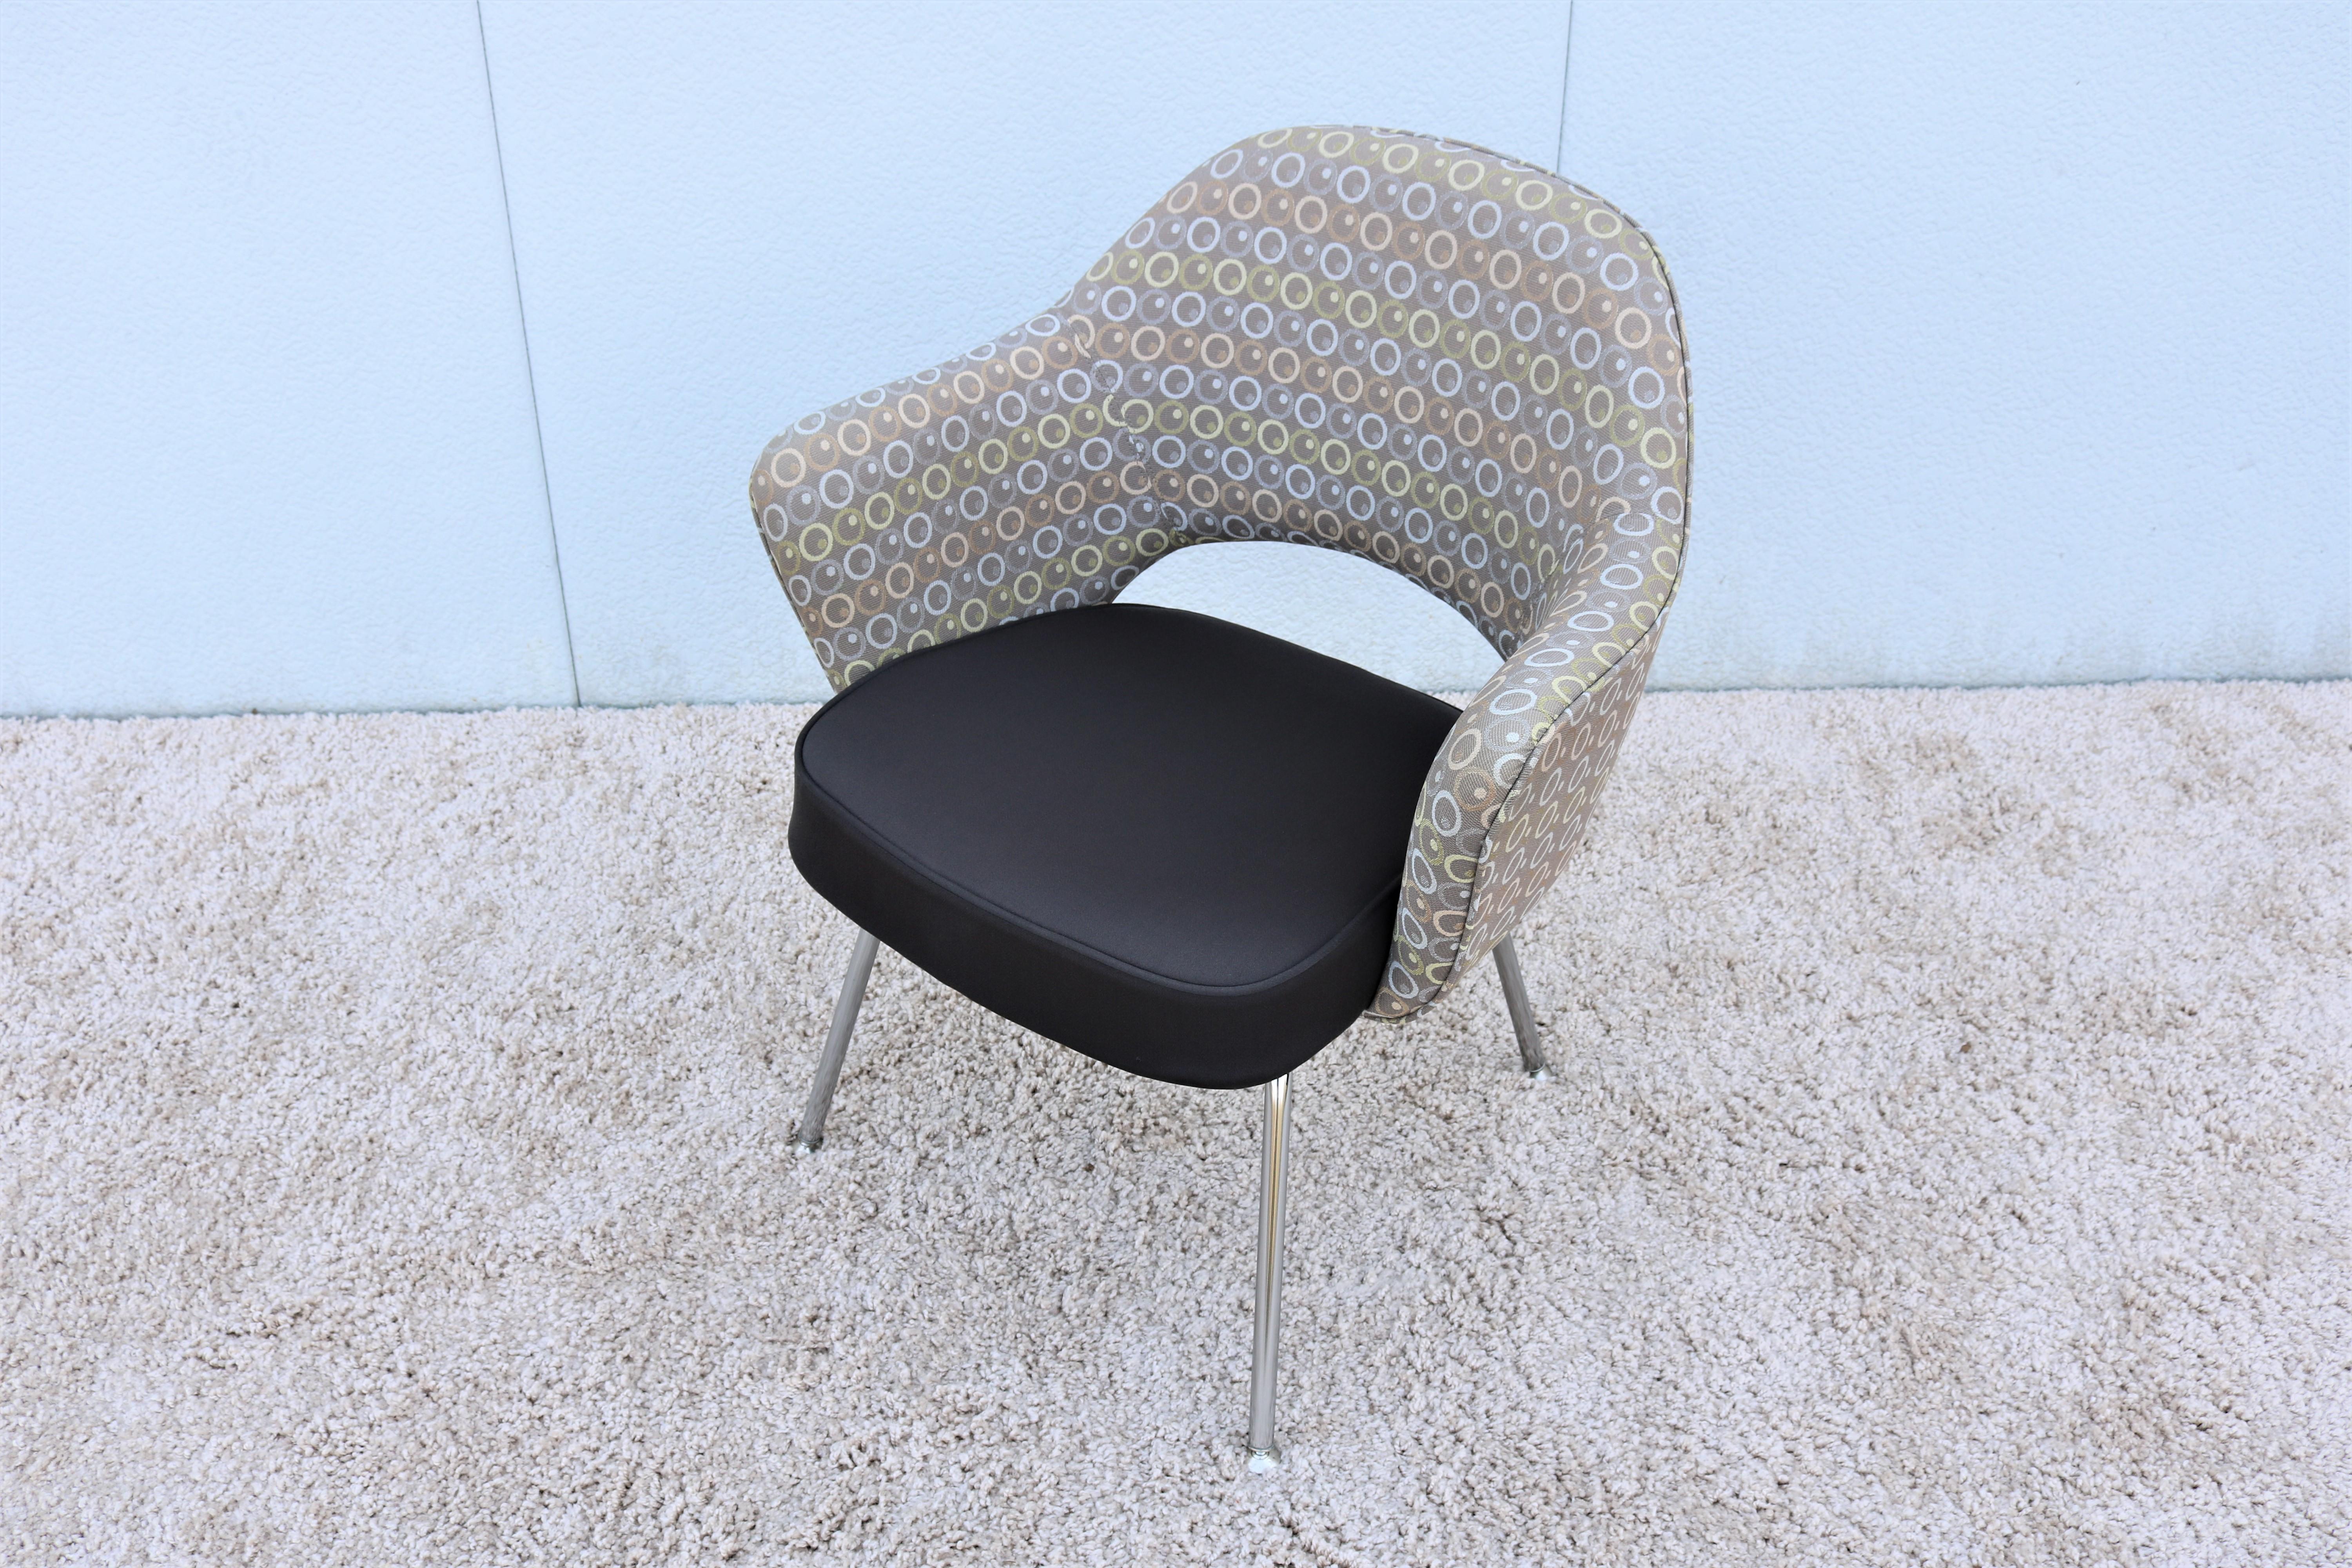 Stunning authentic Mid-century modern Saarinen Executive Arm Chair by Knoll.
One of Knoll most popular designs that achieved comfort through the shape of its shell.
Was introduced in 1950 a midcentury modern classic.

Specifications:
Upholstered